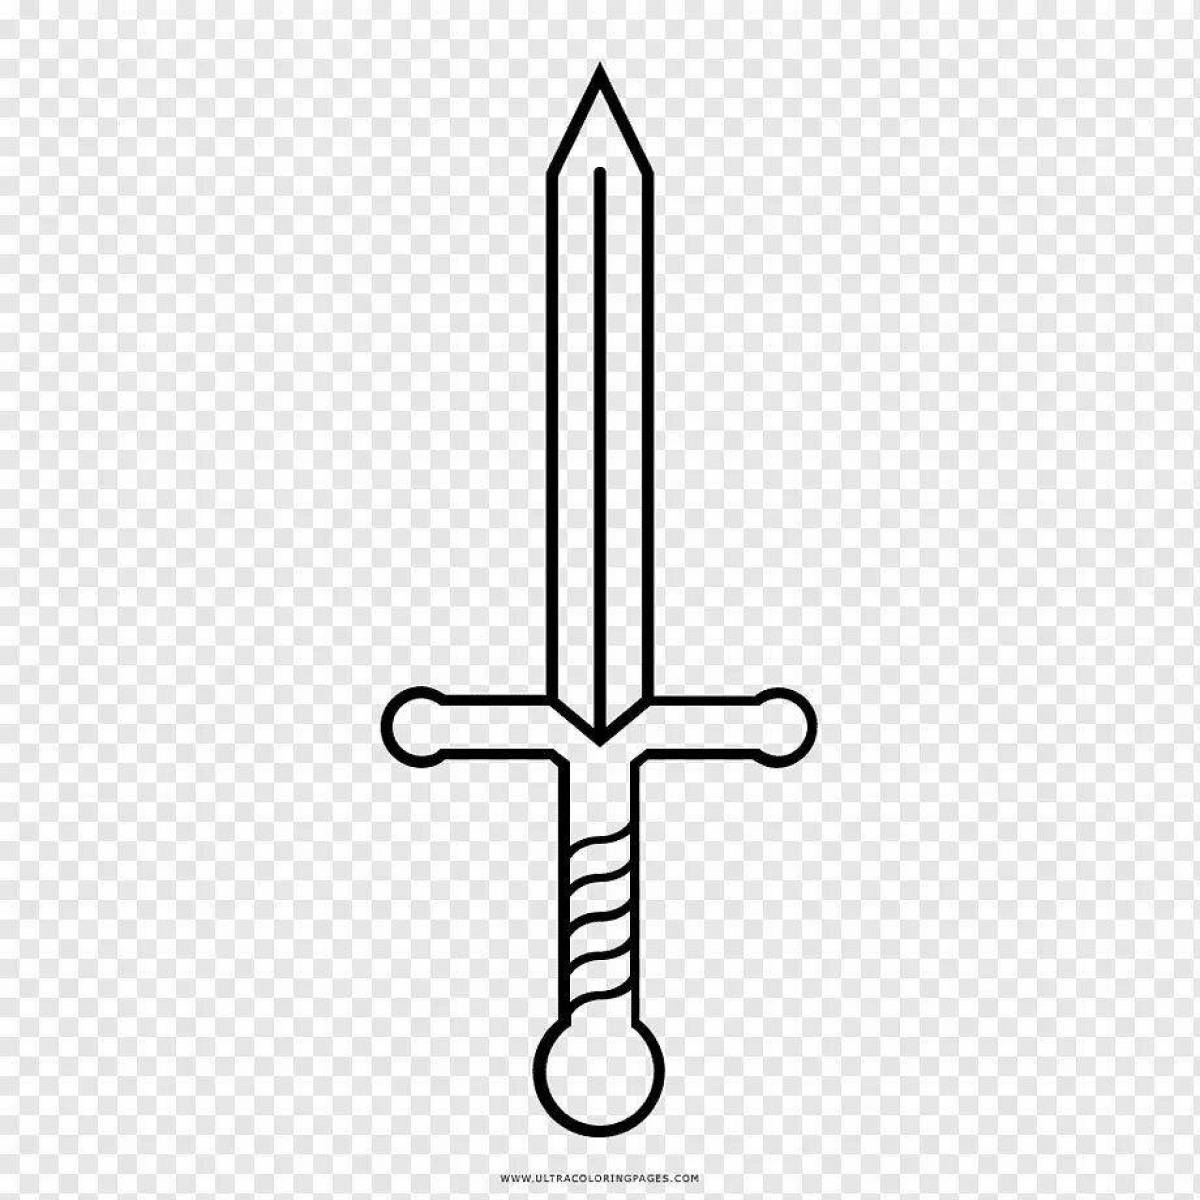 A fun sword coloring page for kids